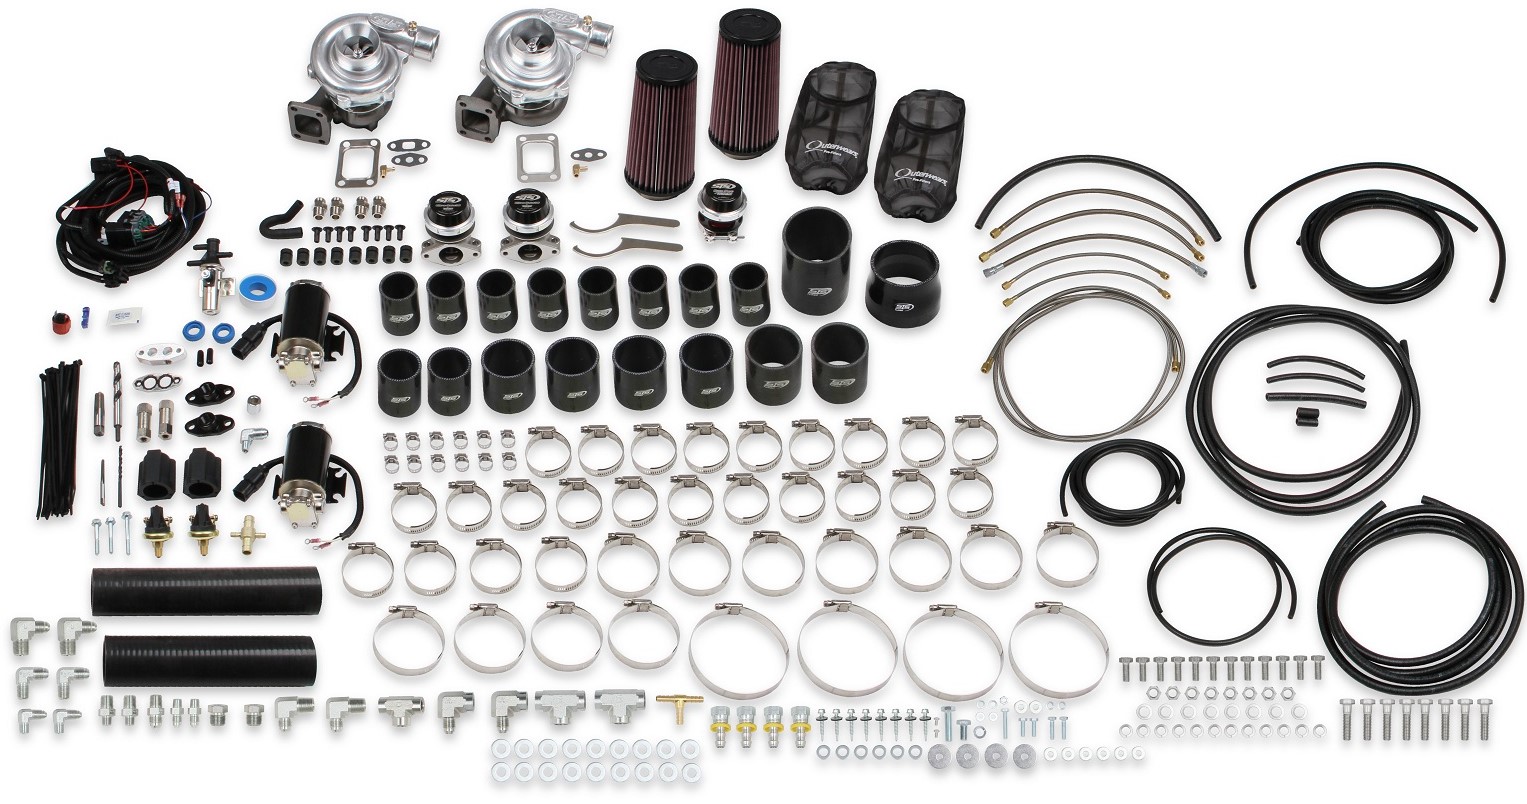 C6 Corvette Grand Sport STS Turbo FULL Kit from Holley 2010-2013 Rear Mounted Twin Turbo System